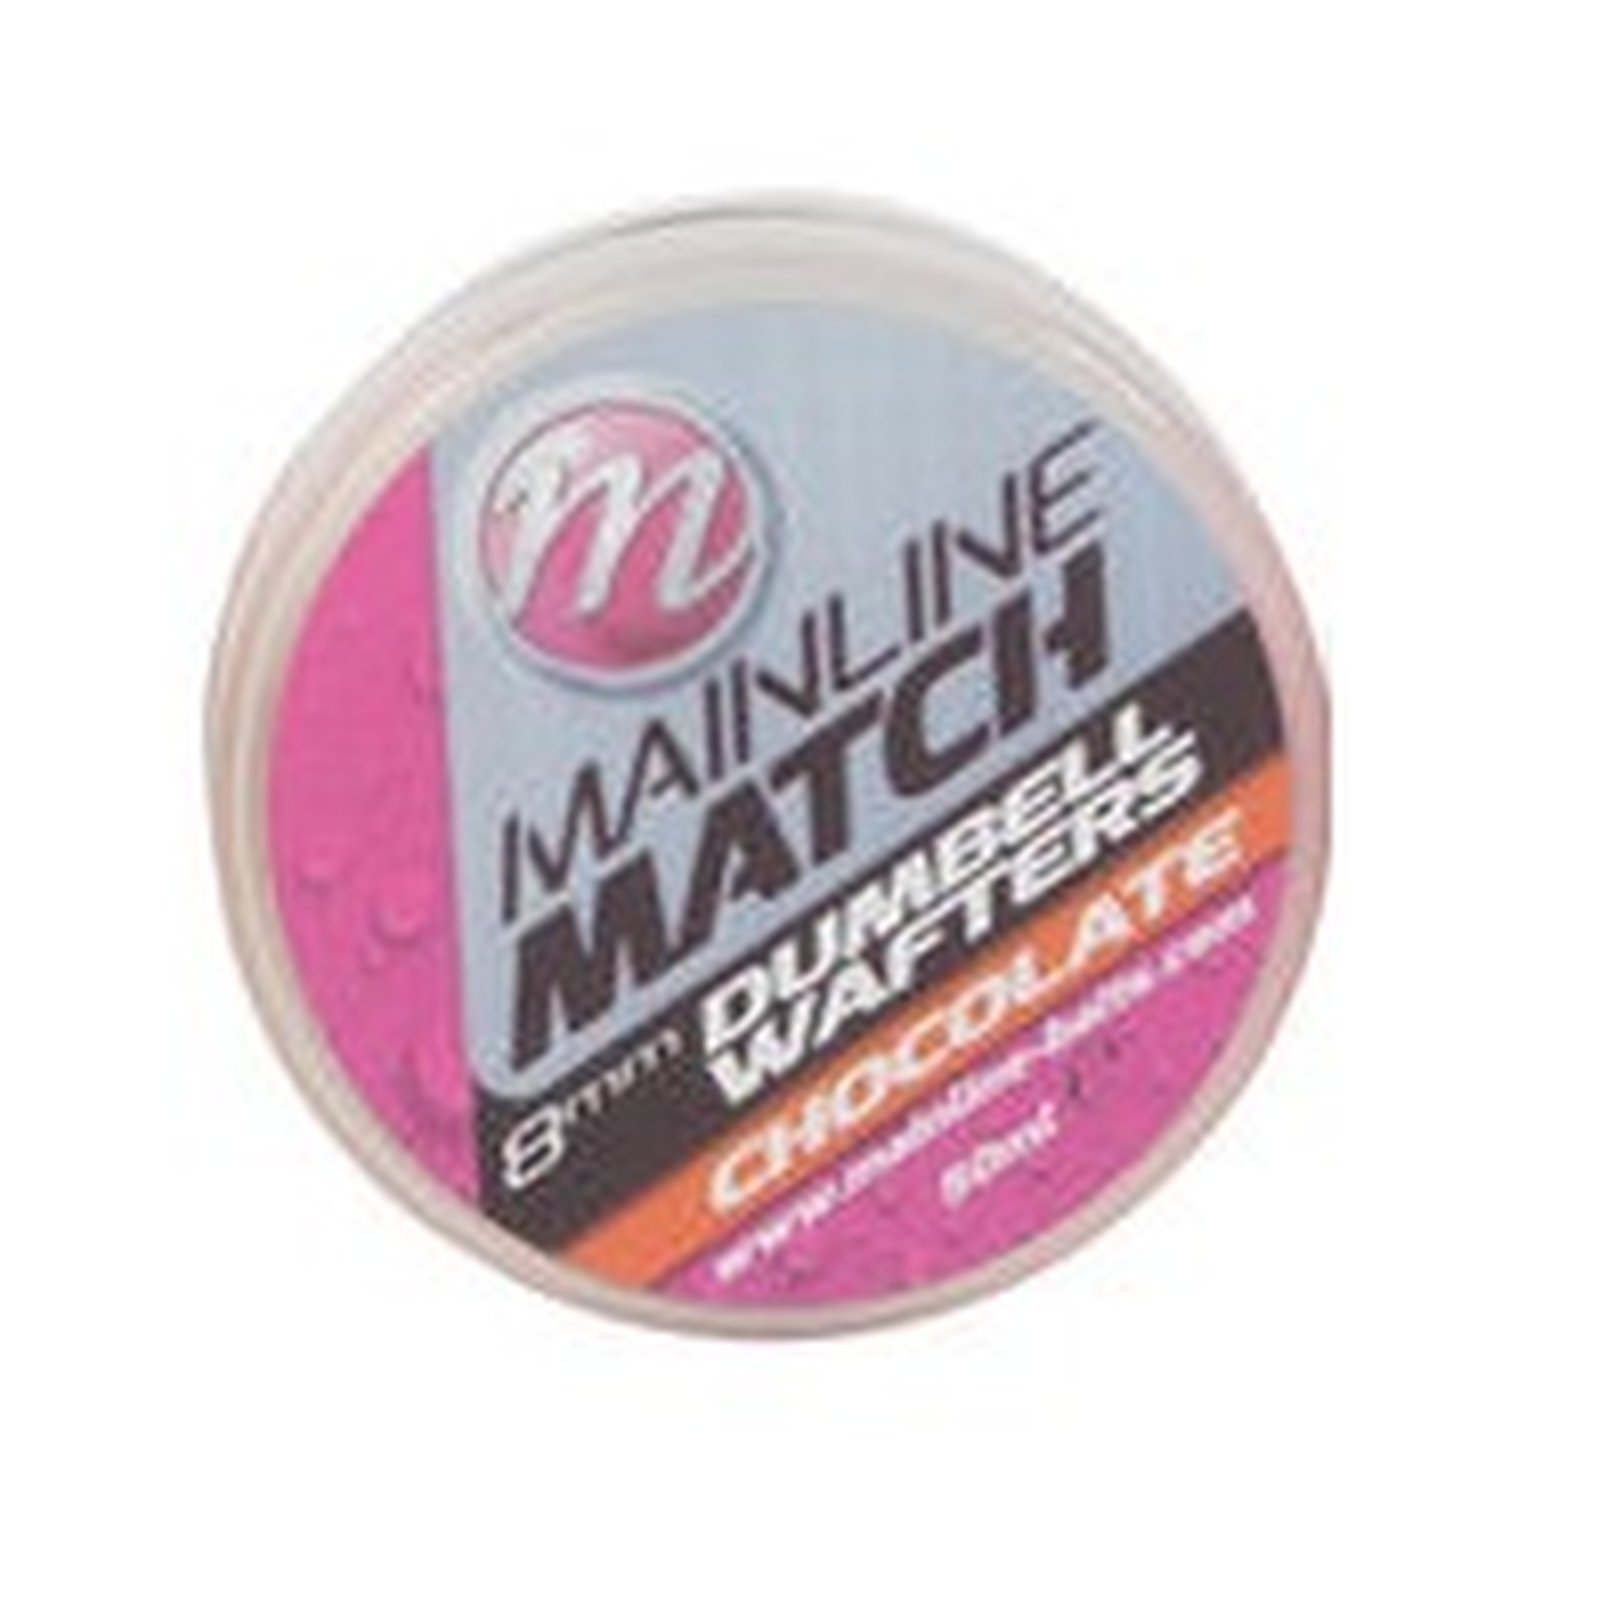 Mainline Match Dumbell Wafters 6mm 50ml - Orange Chocolate